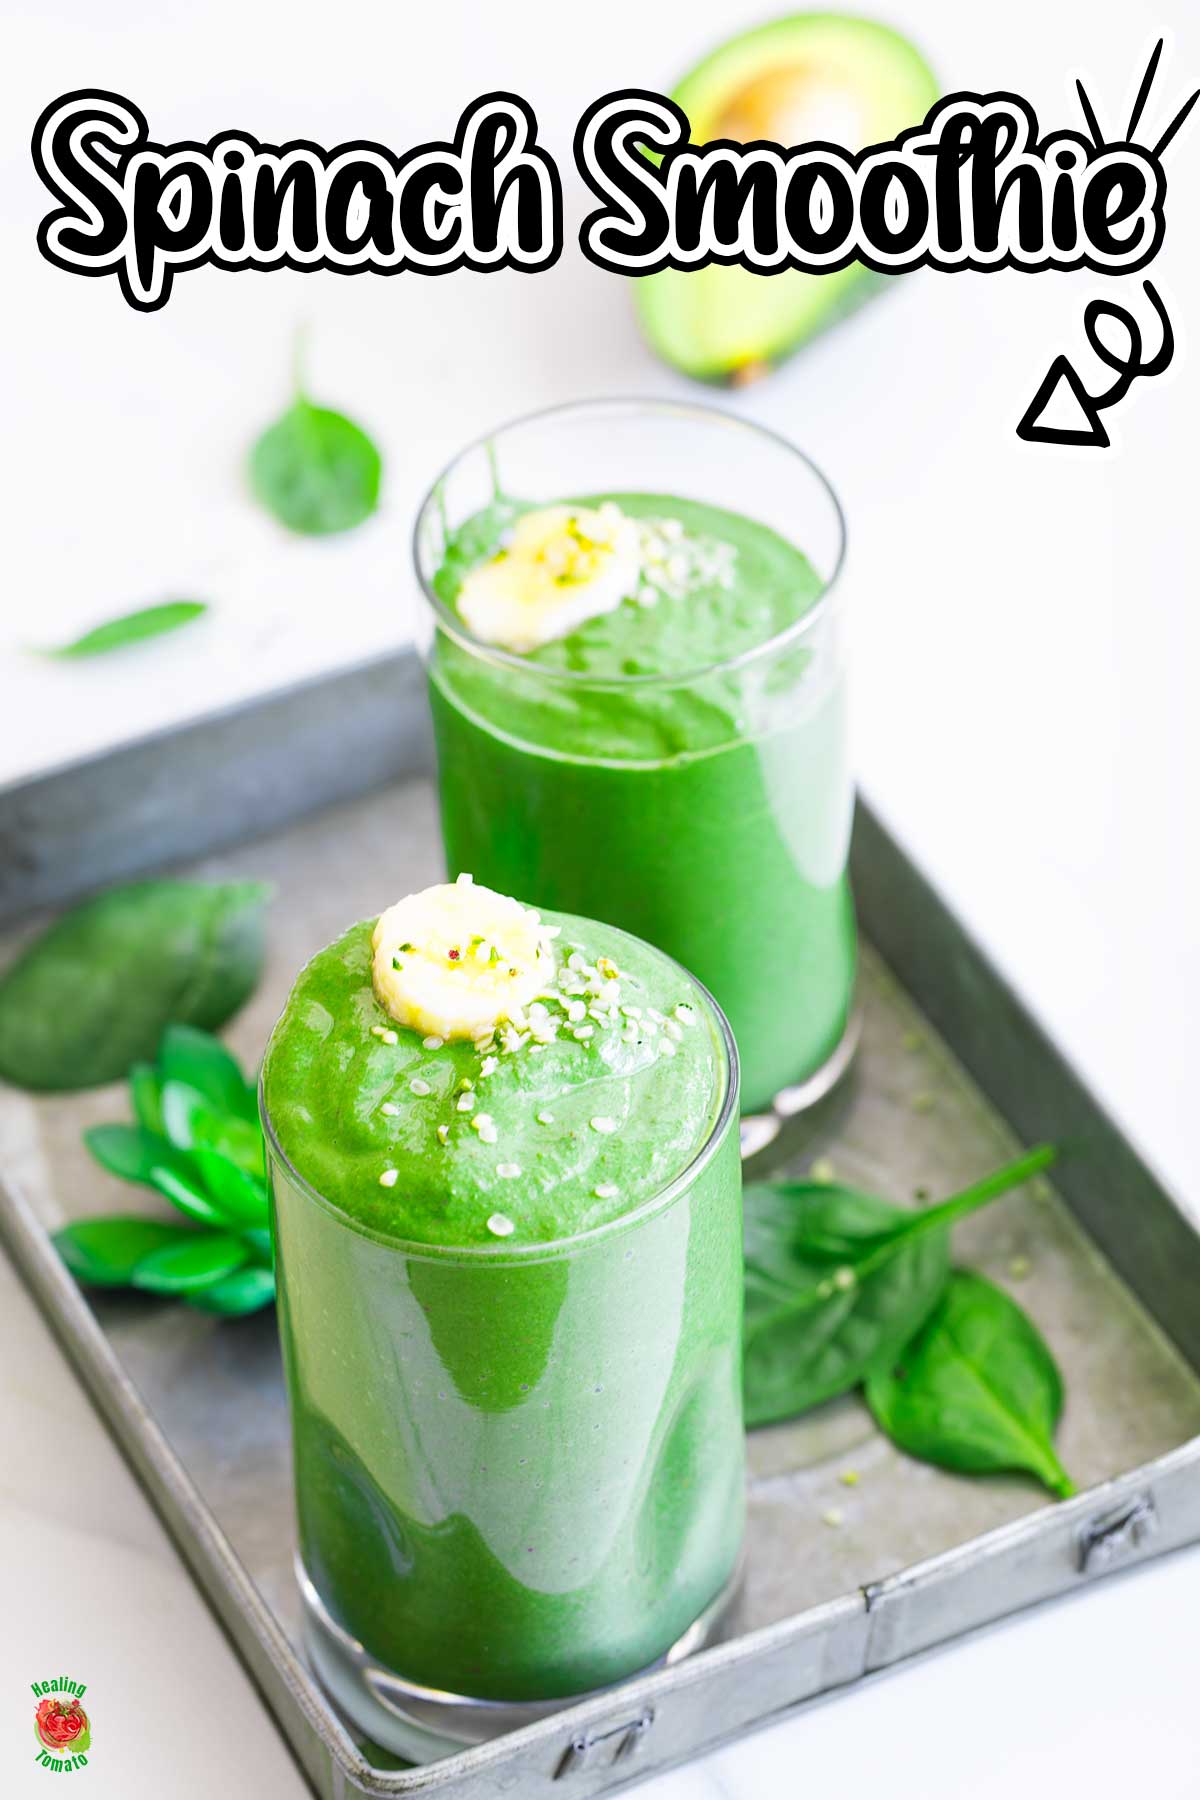 Top and angle view of a glass filled with green smoothie. A second glass is in the background too.